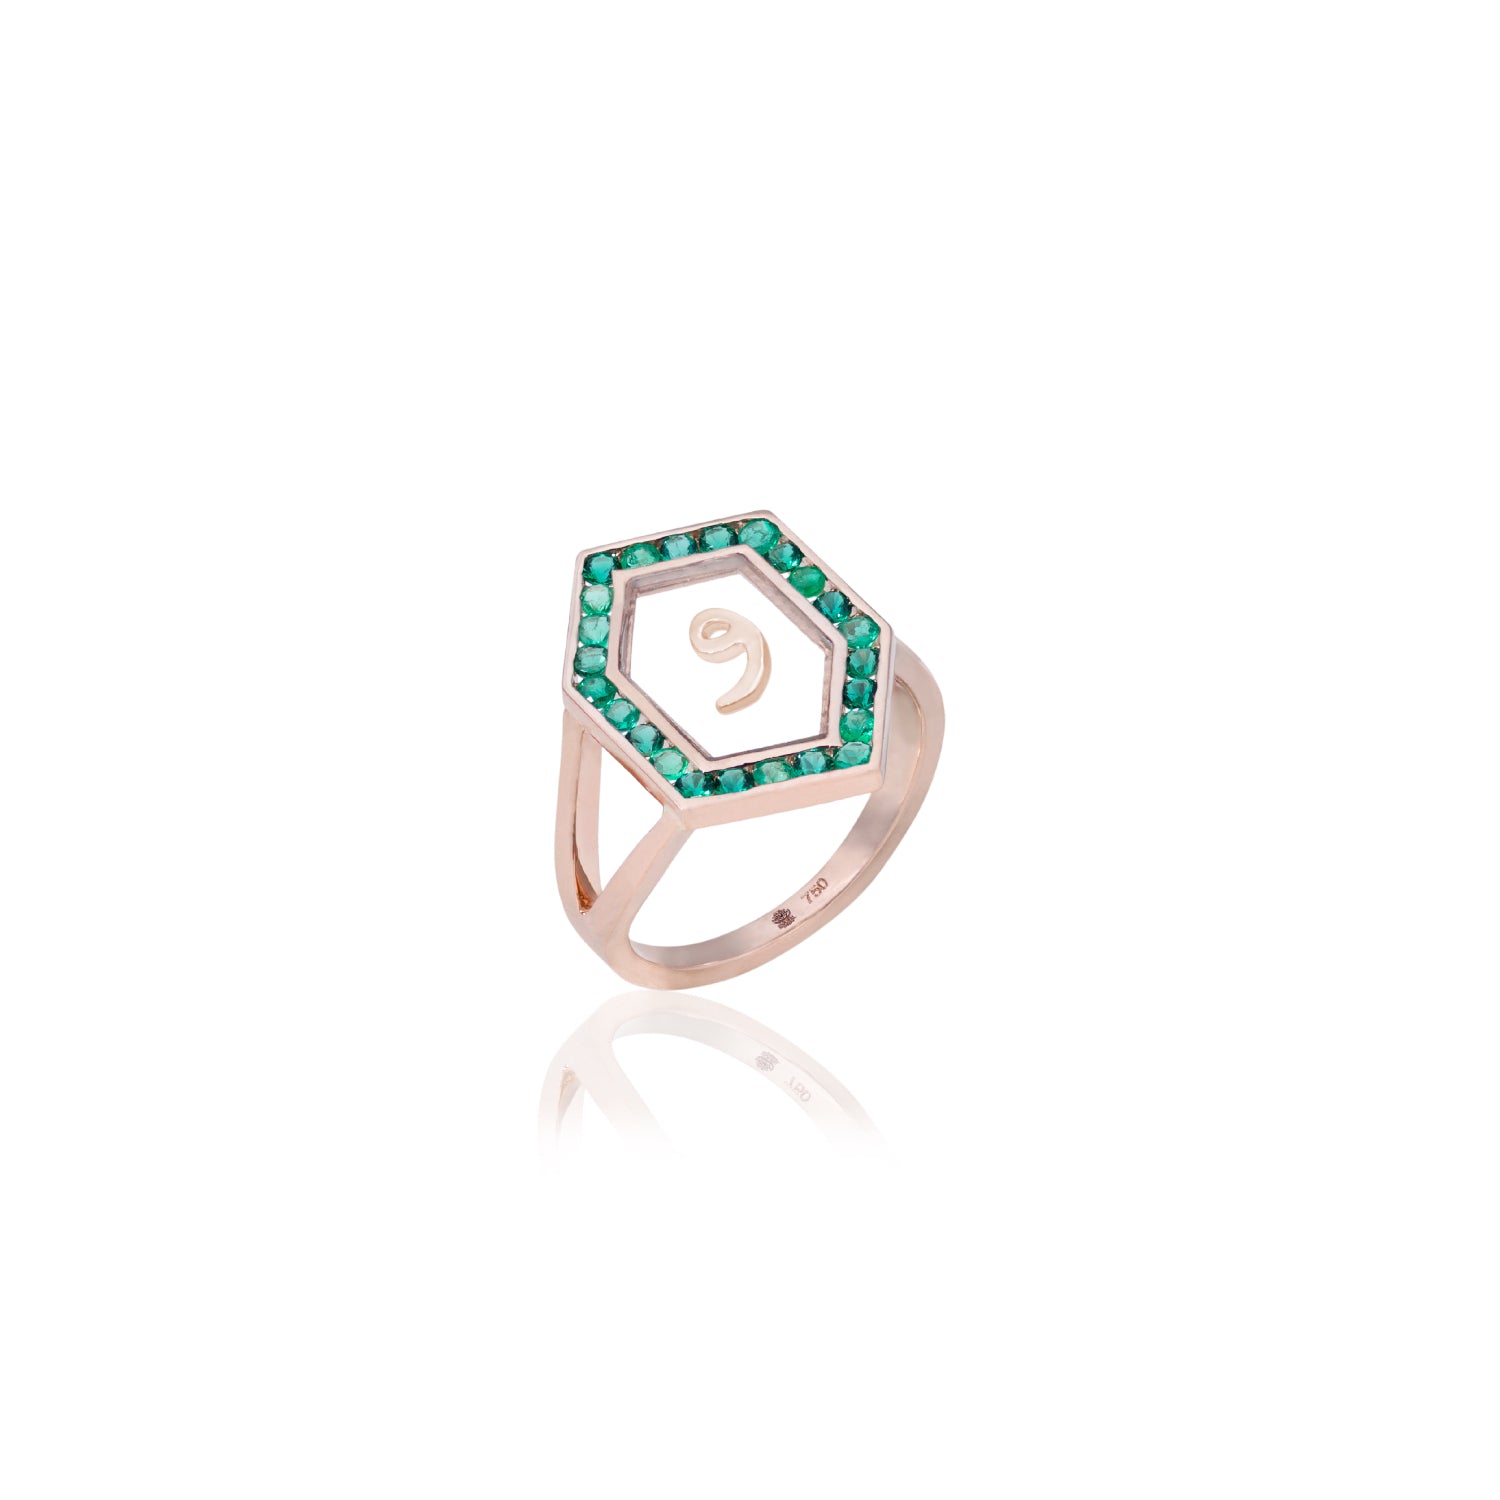 Qamoos 1.0 Letter و Emerald Ring in Rose Gold